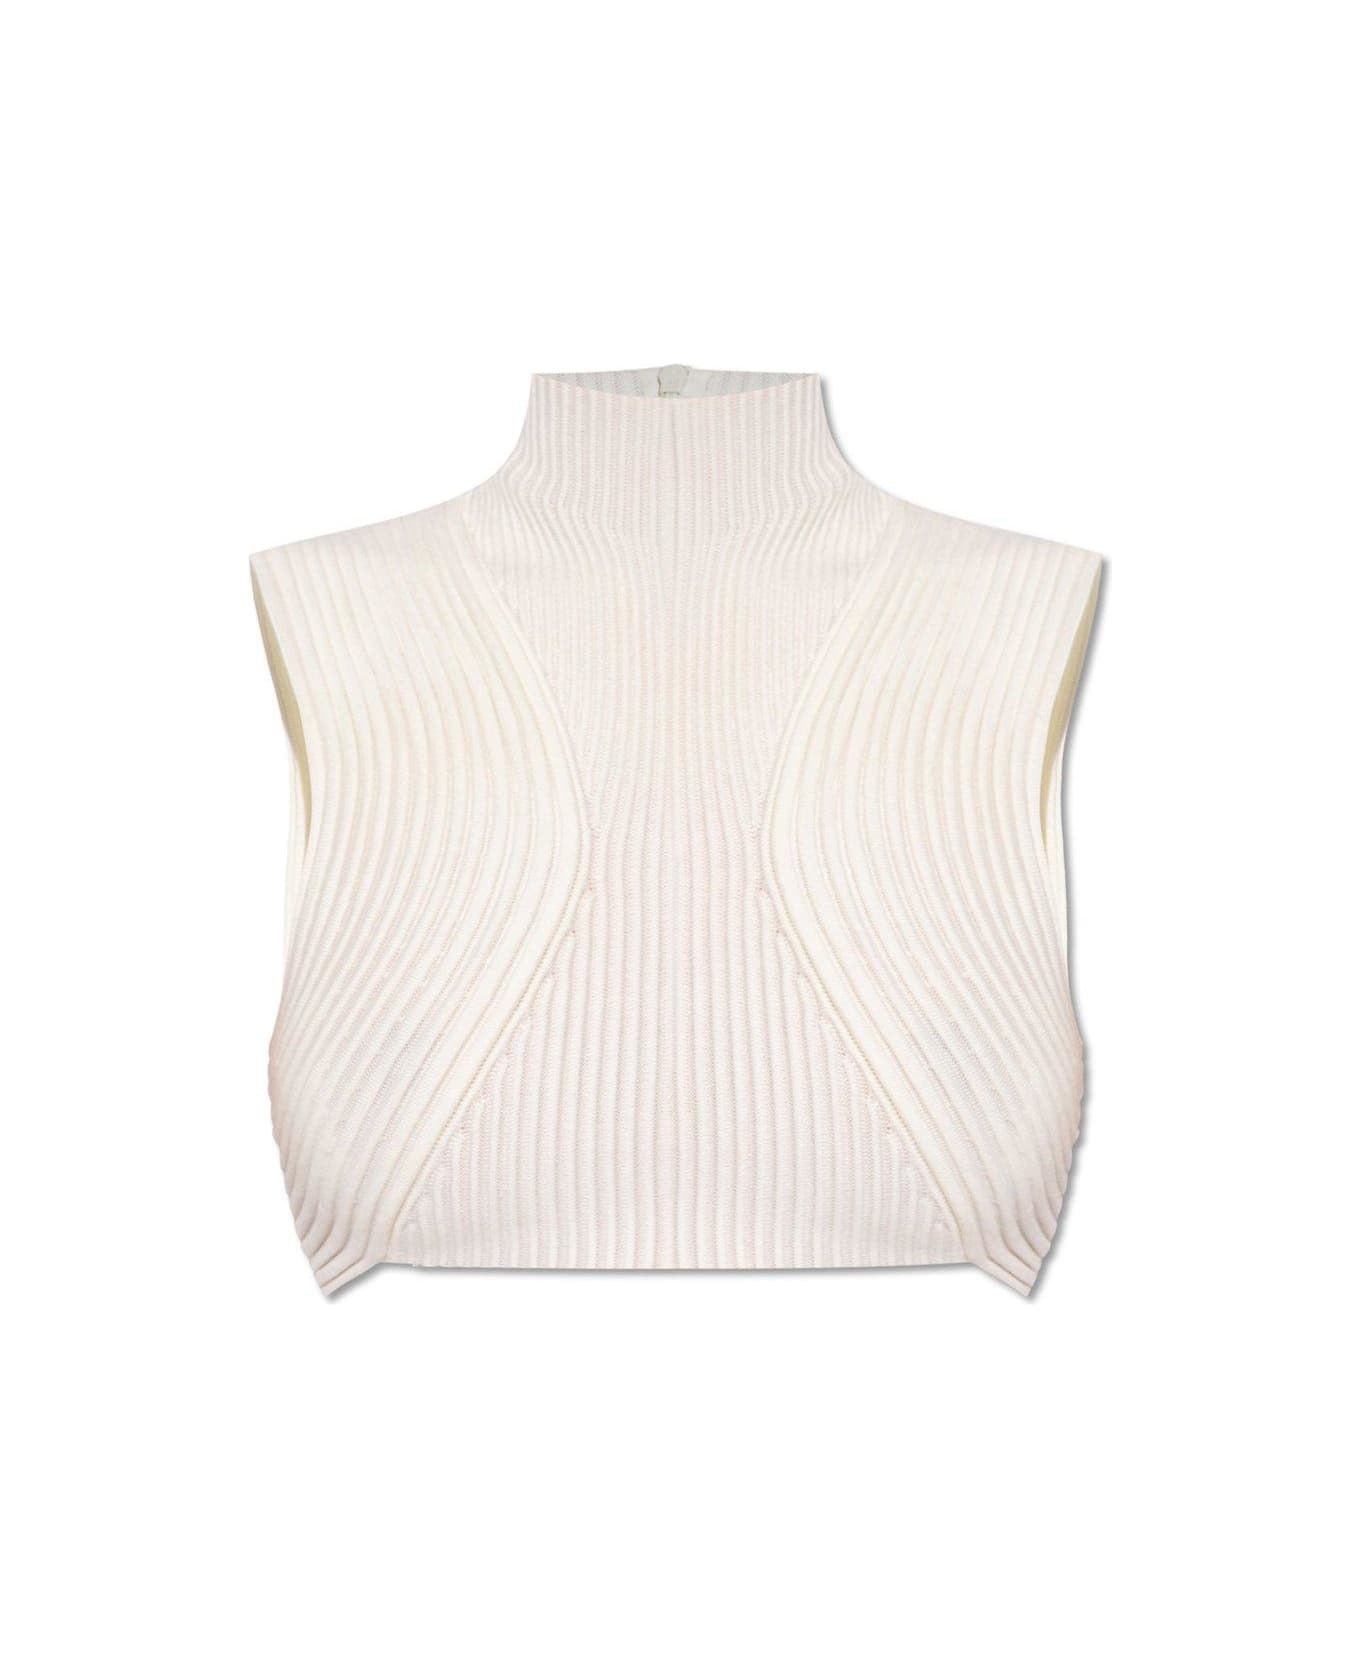 Chloé High-neck Ribbed Cropped Top - Iconic milk